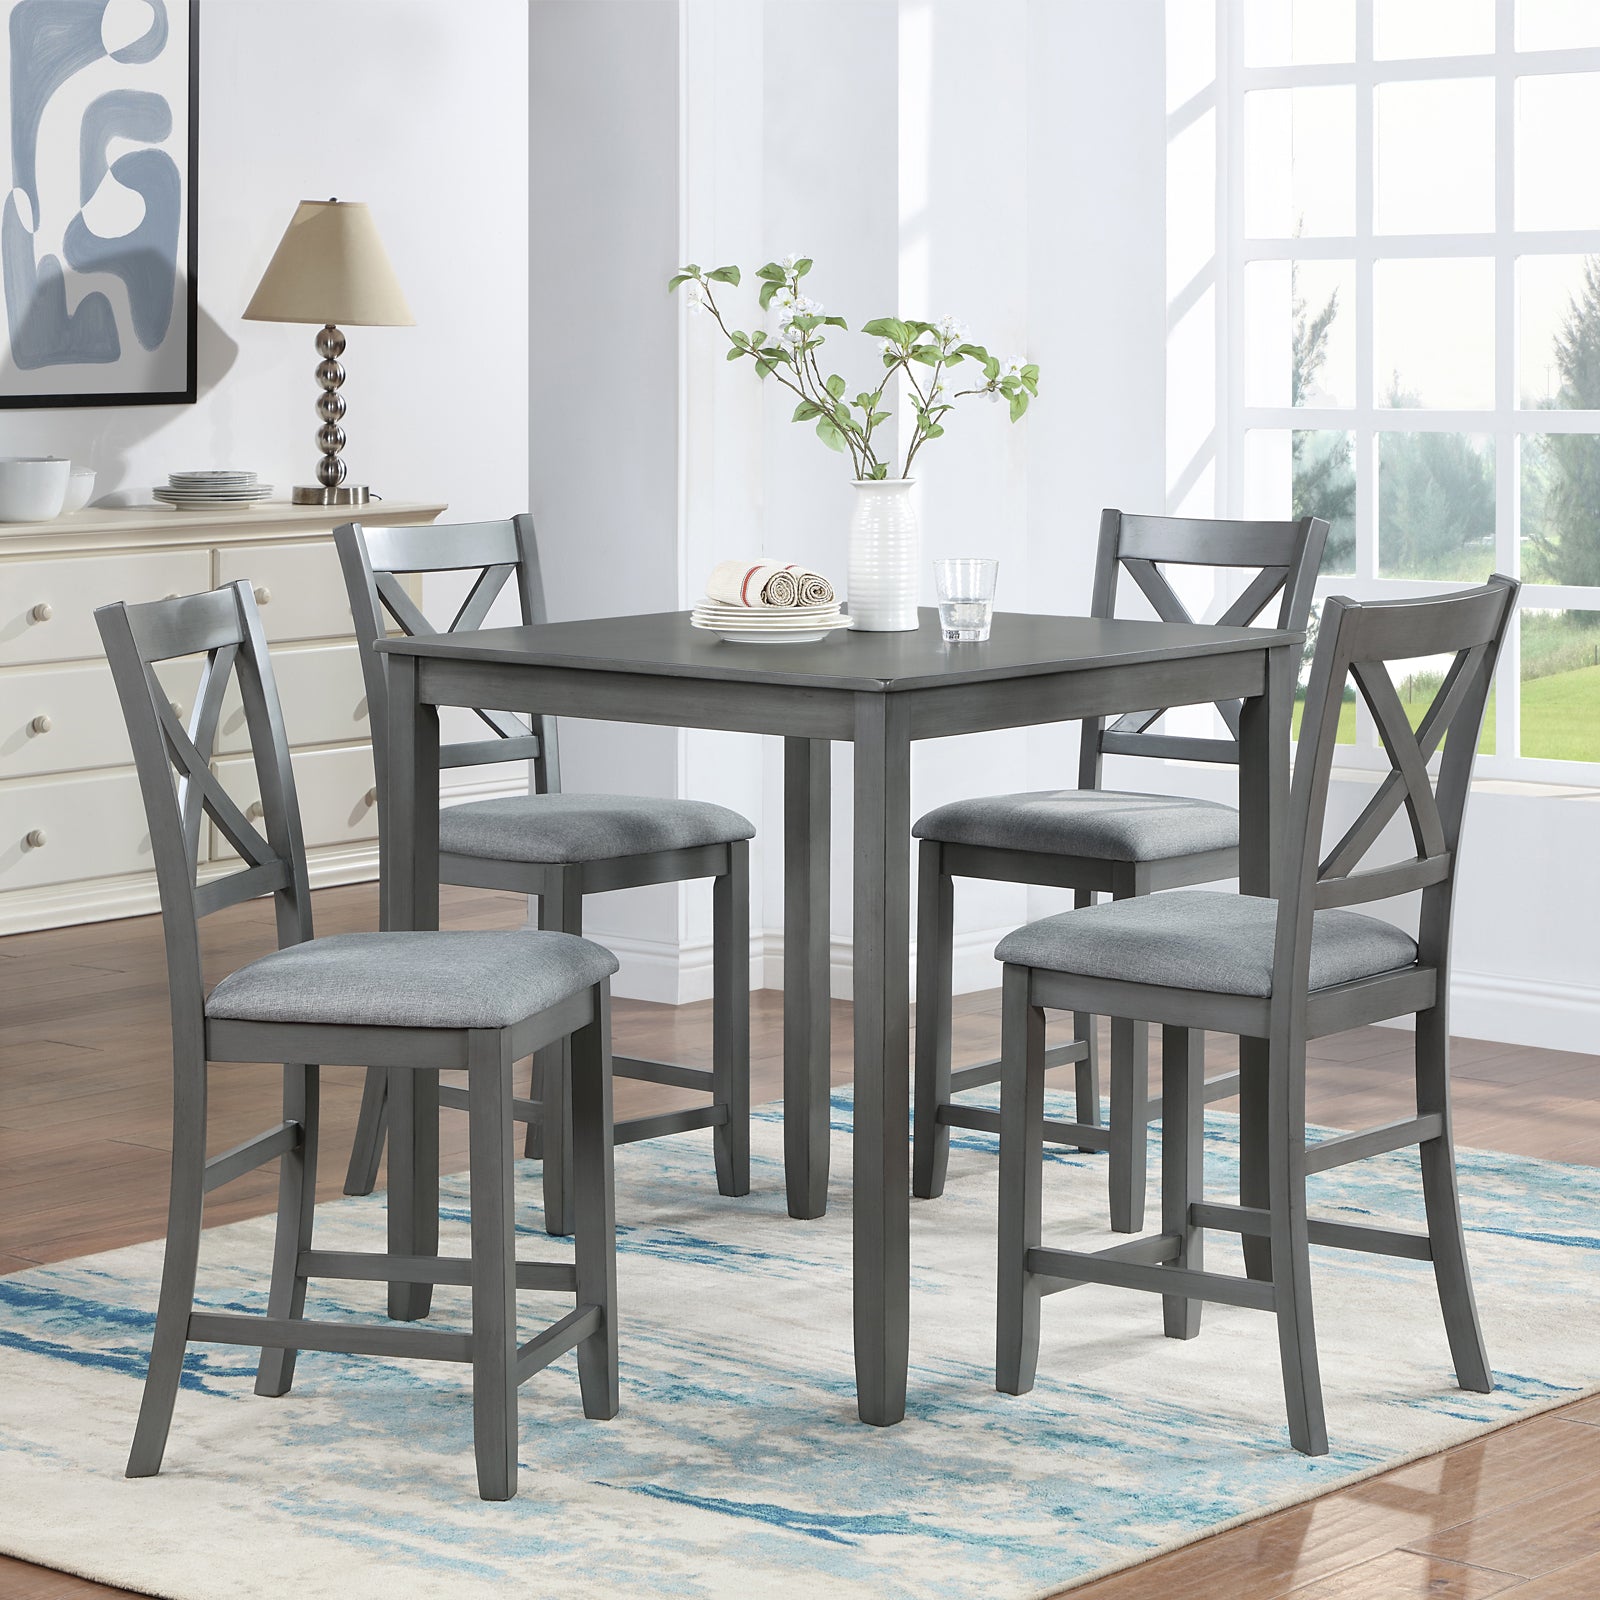 Wooden Dining Square Table, Kitchen Table for Small wood-gray-seats 4-gray-wood-dining room-acacia-4